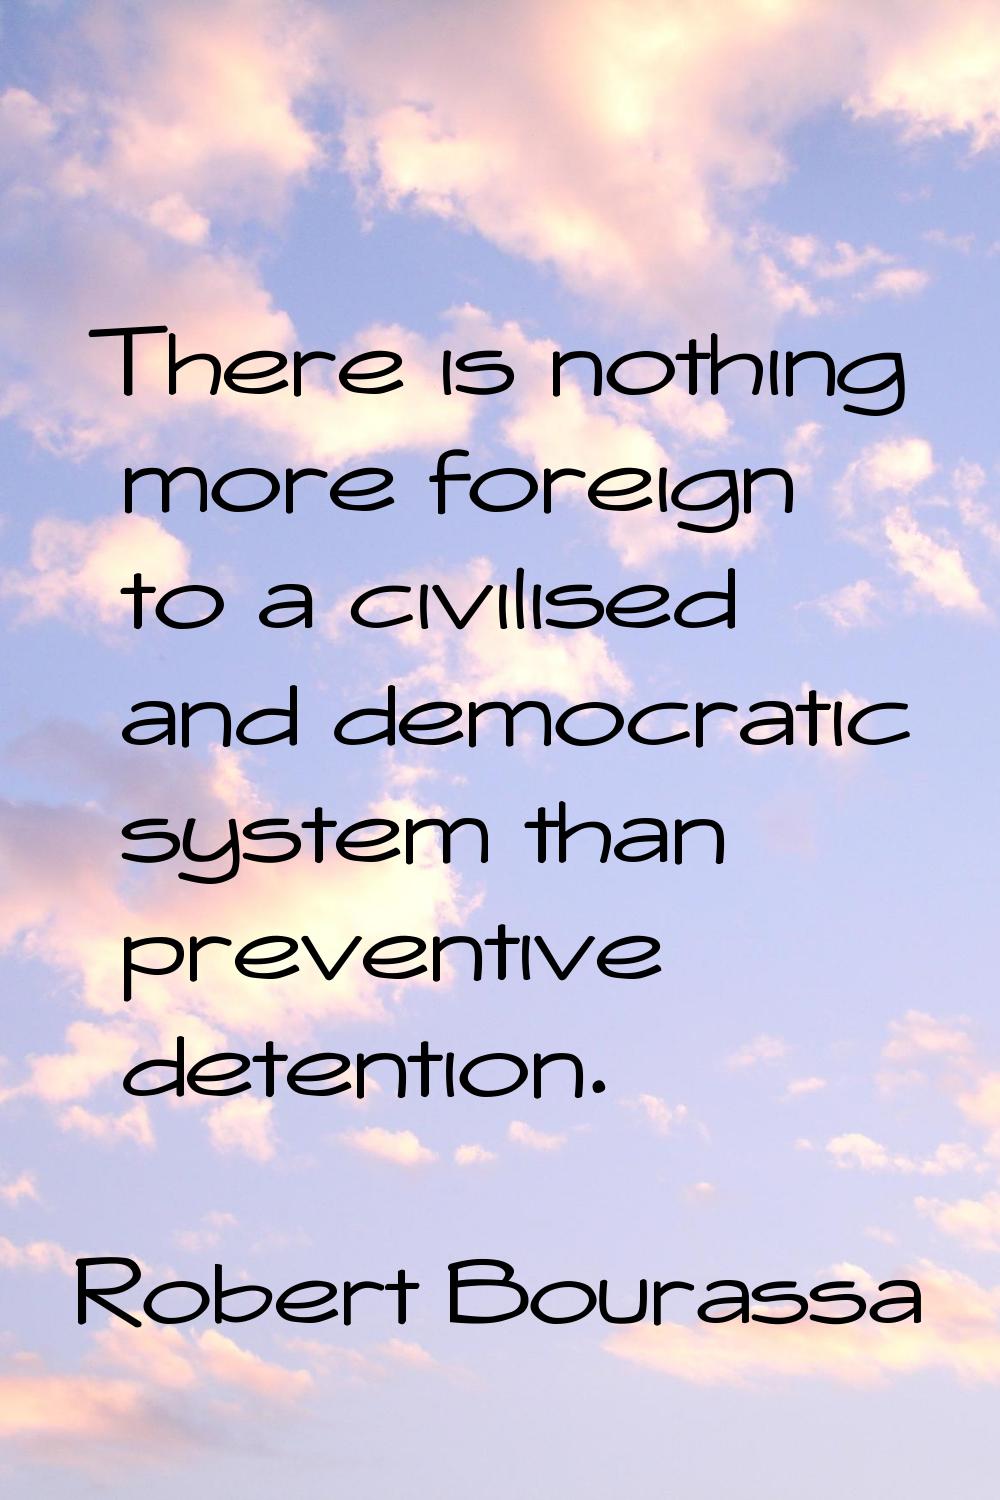 There is nothing more foreign to a civilised and democratic system than preventive detention.